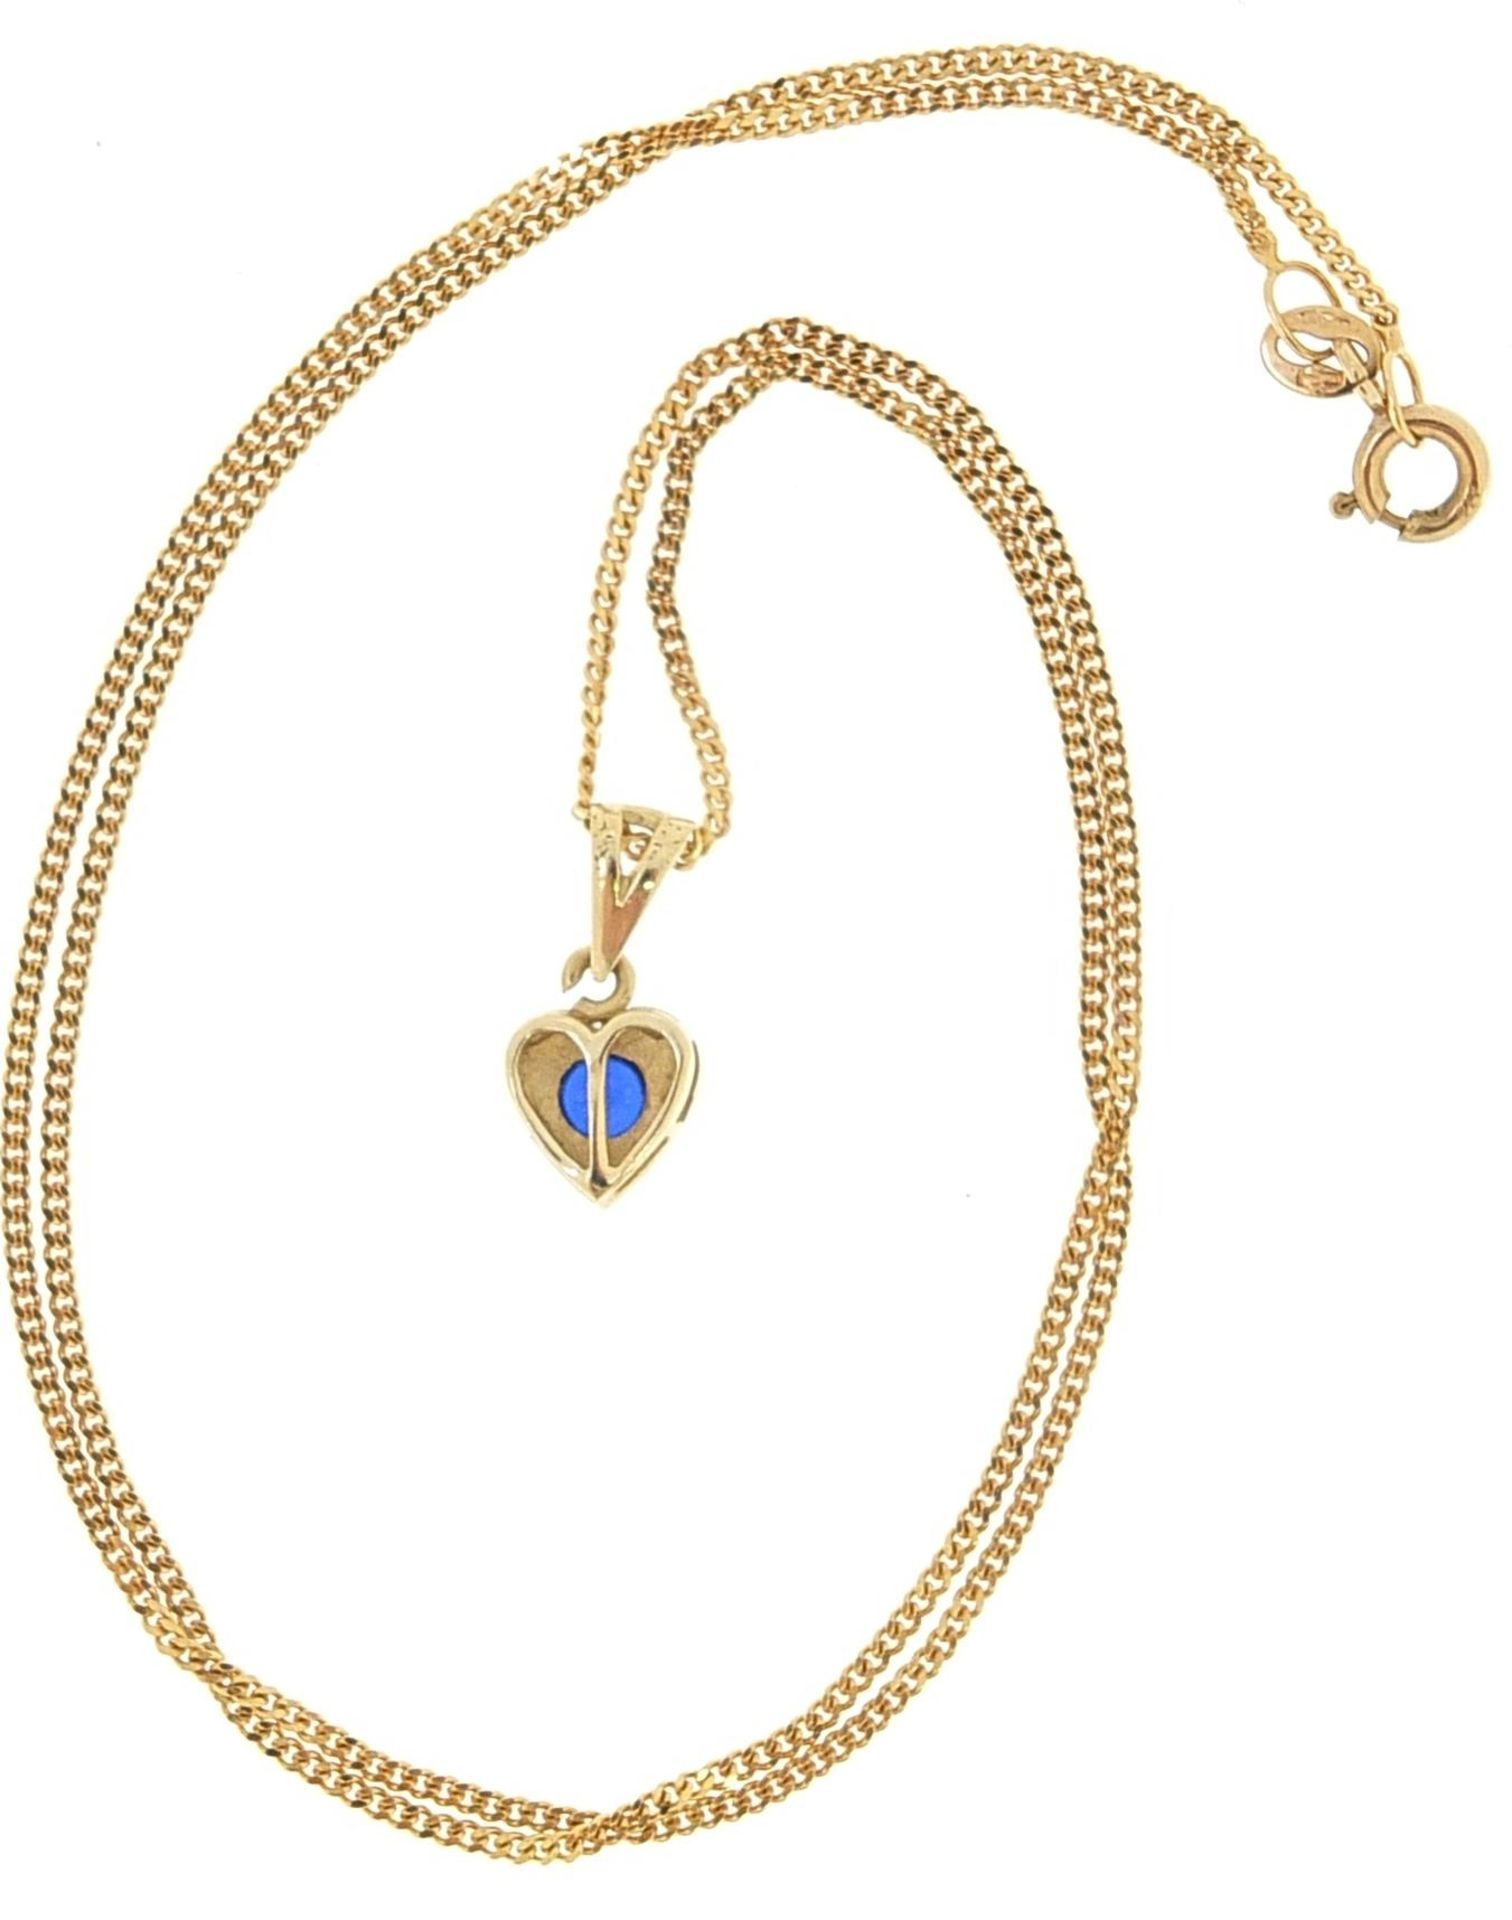 9ct gold necklace with a yellow metal love heart pendant set with a blue stone, 1.4cm high and - Image 3 of 3